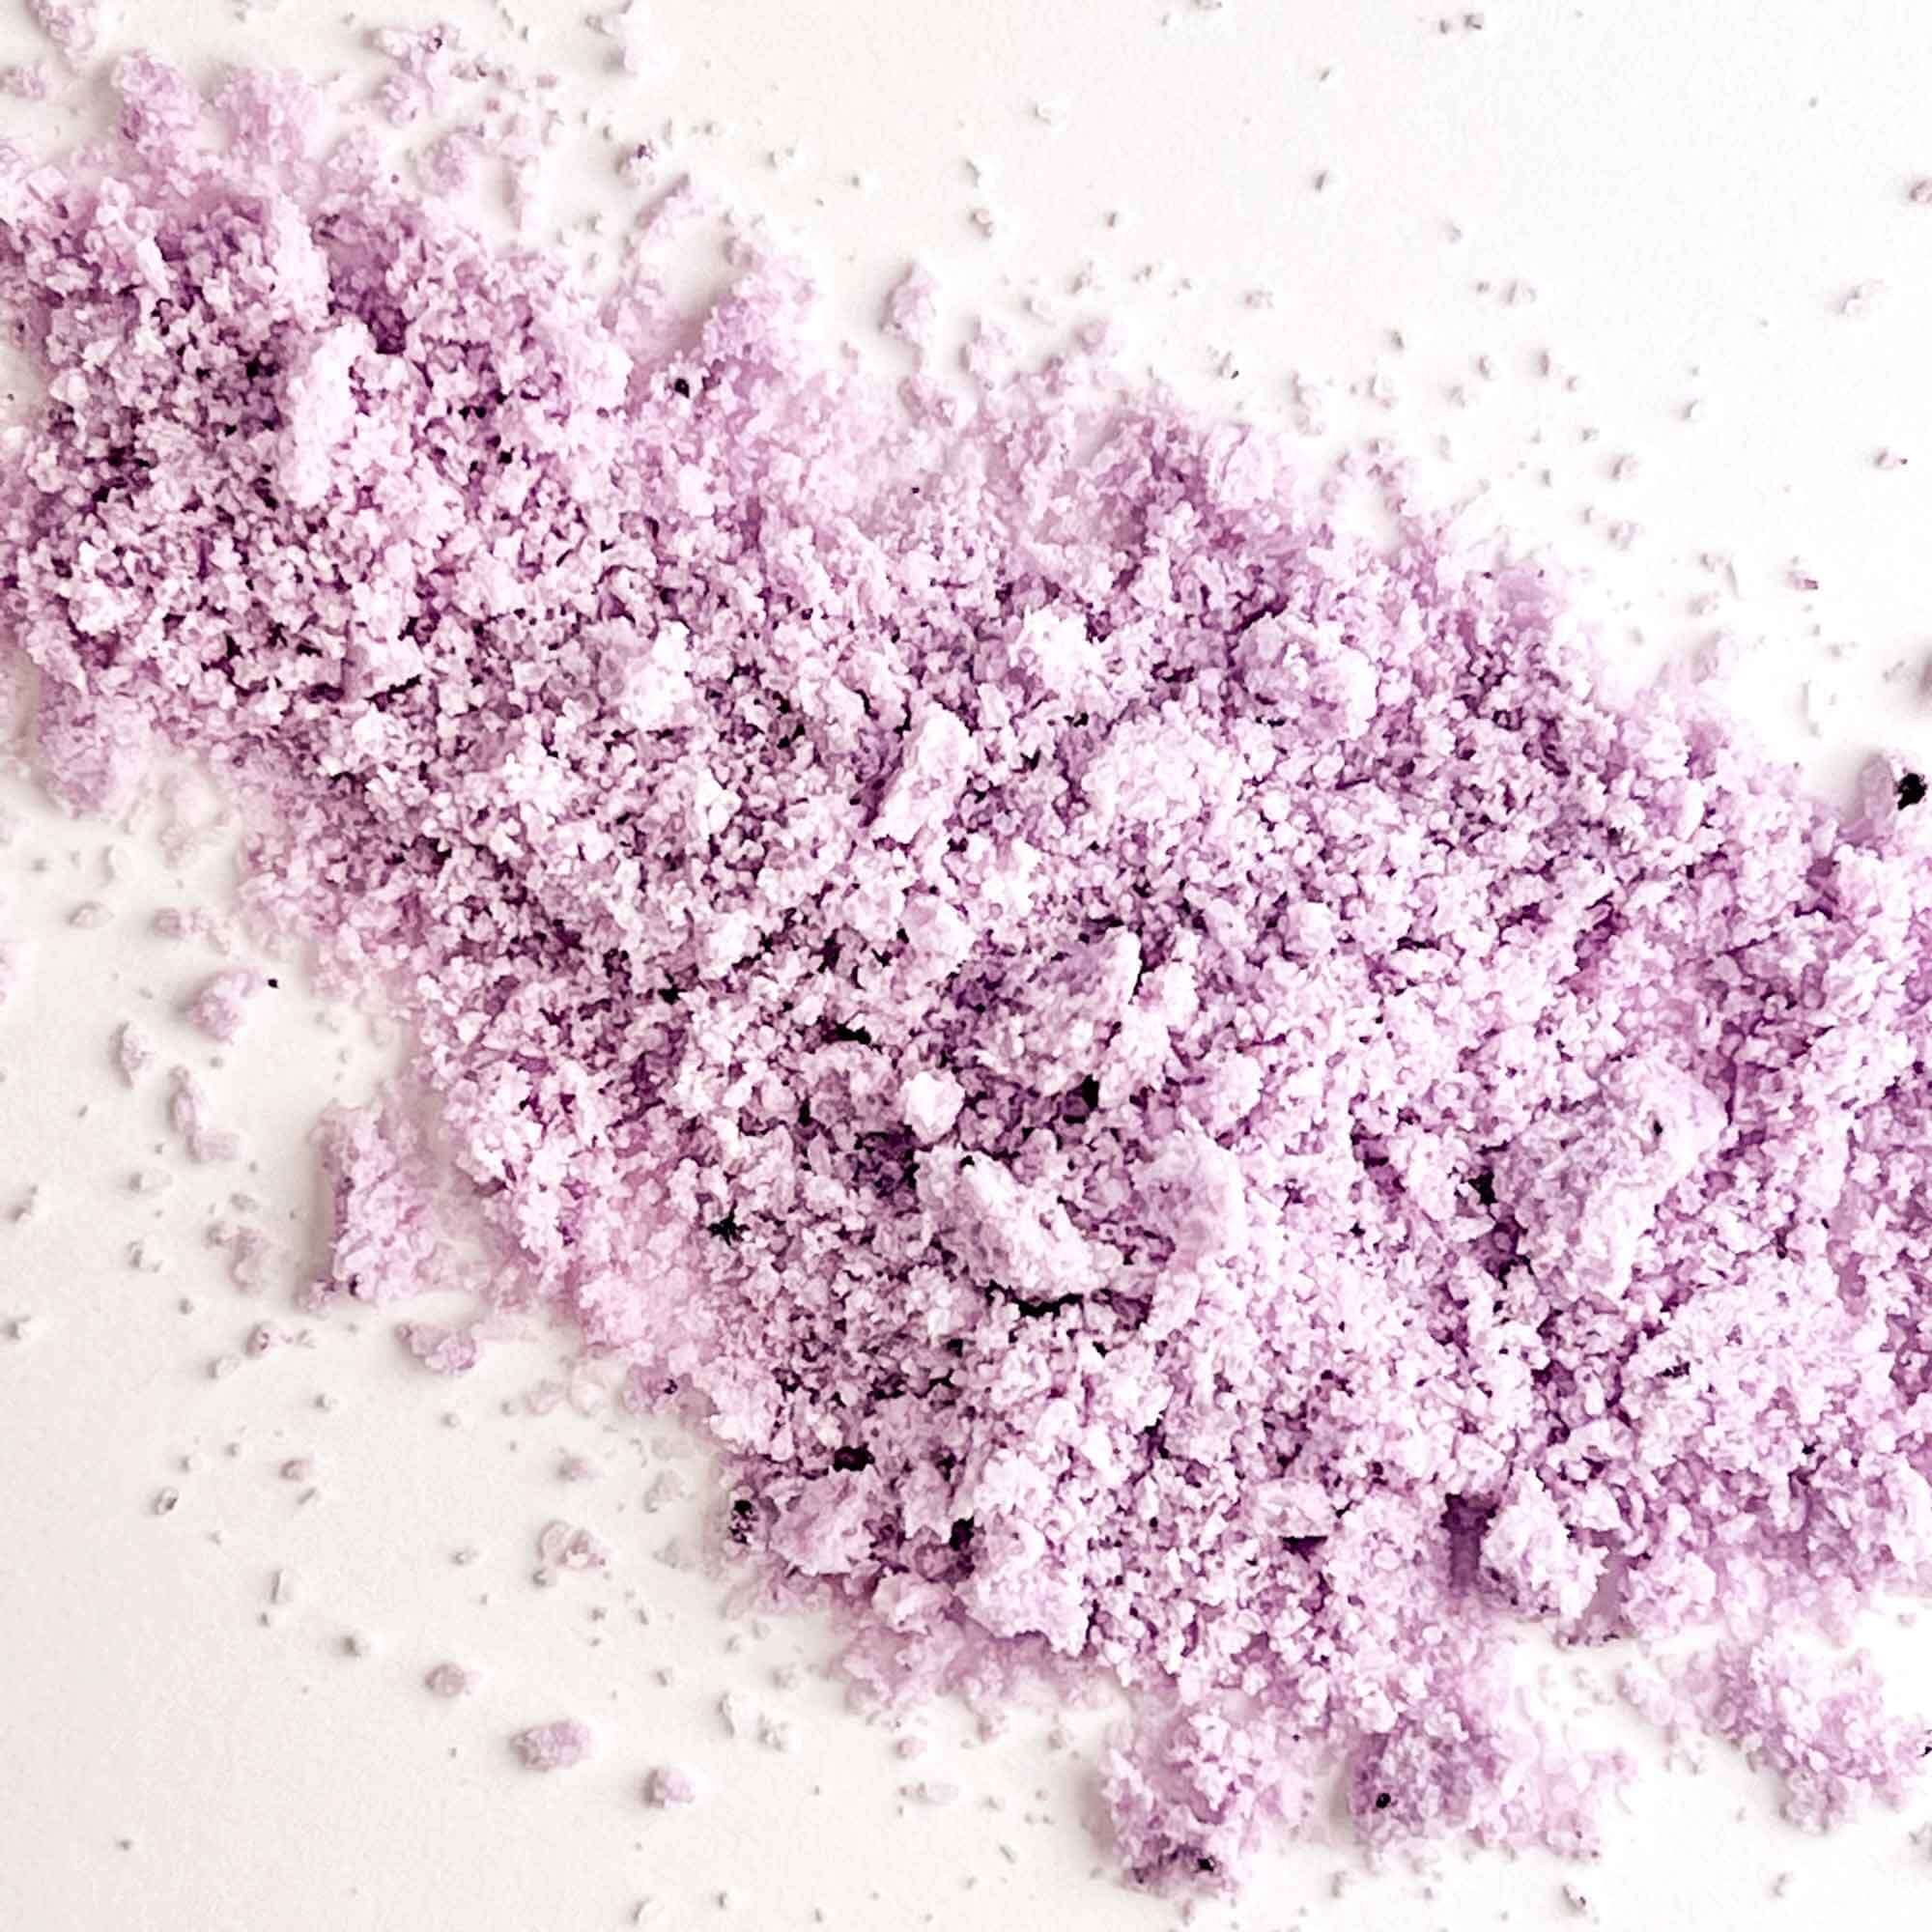 Relax and Rejuvenate with Our Handmade Lilac Rose Bath Bombs - Natural, Organic and Luxurious